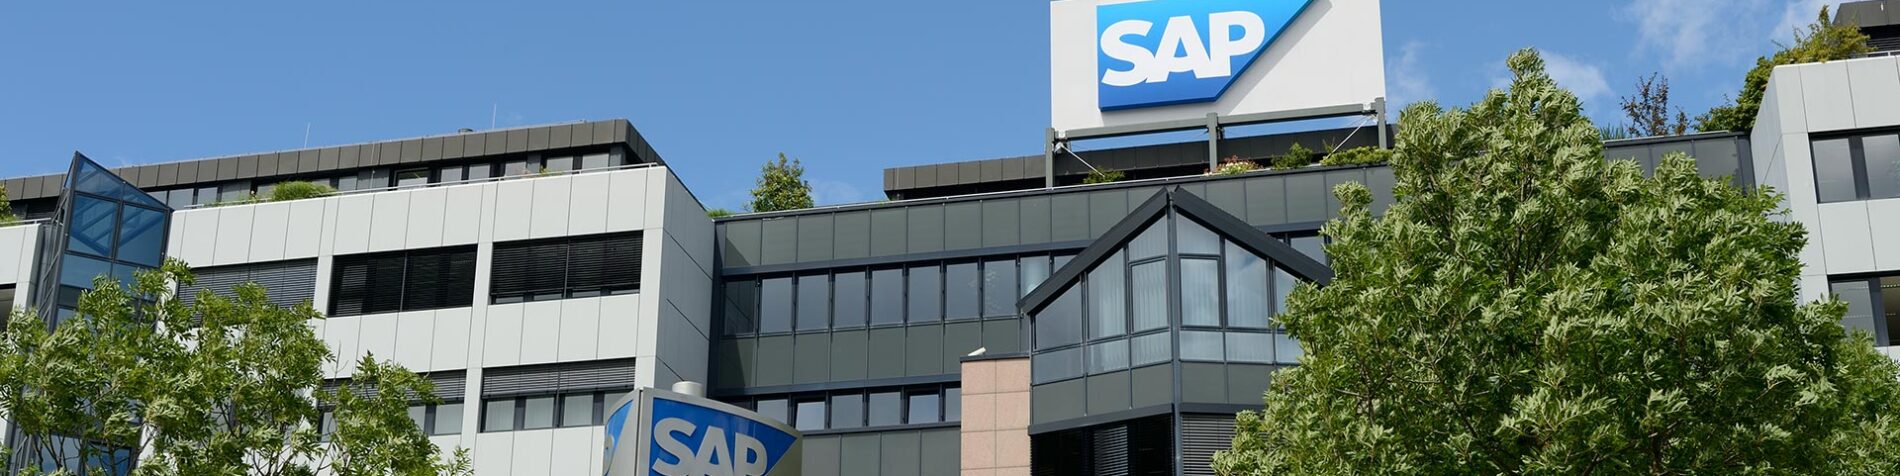 SAP and Lenovo Plan to Bring Advanced Solutions to the New Digital Economy